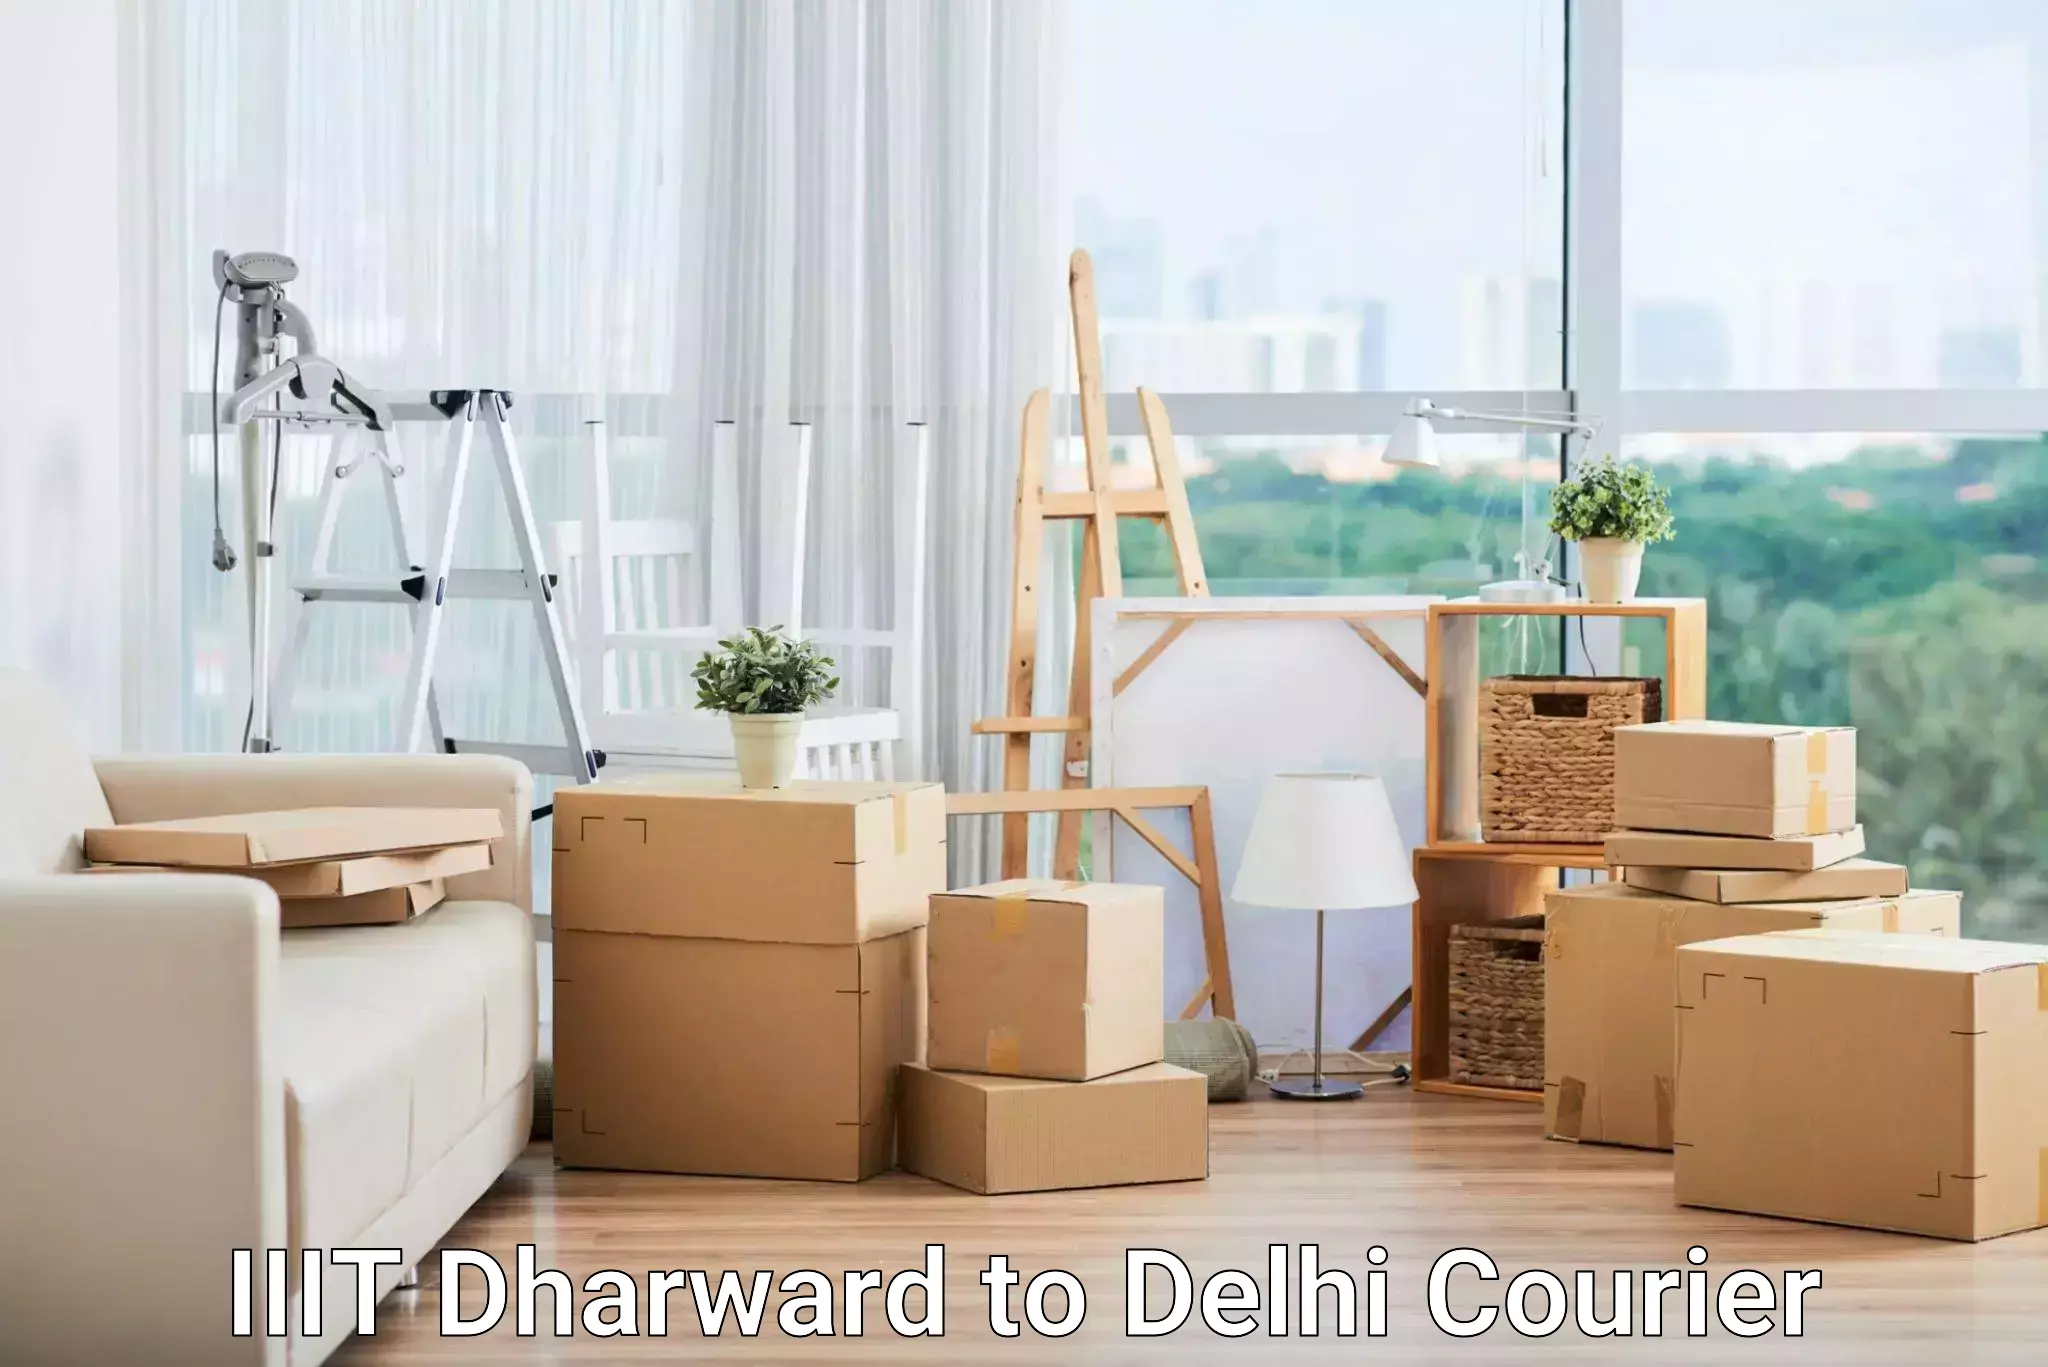 Affordable shipping solutions IIIT Dharward to NCR